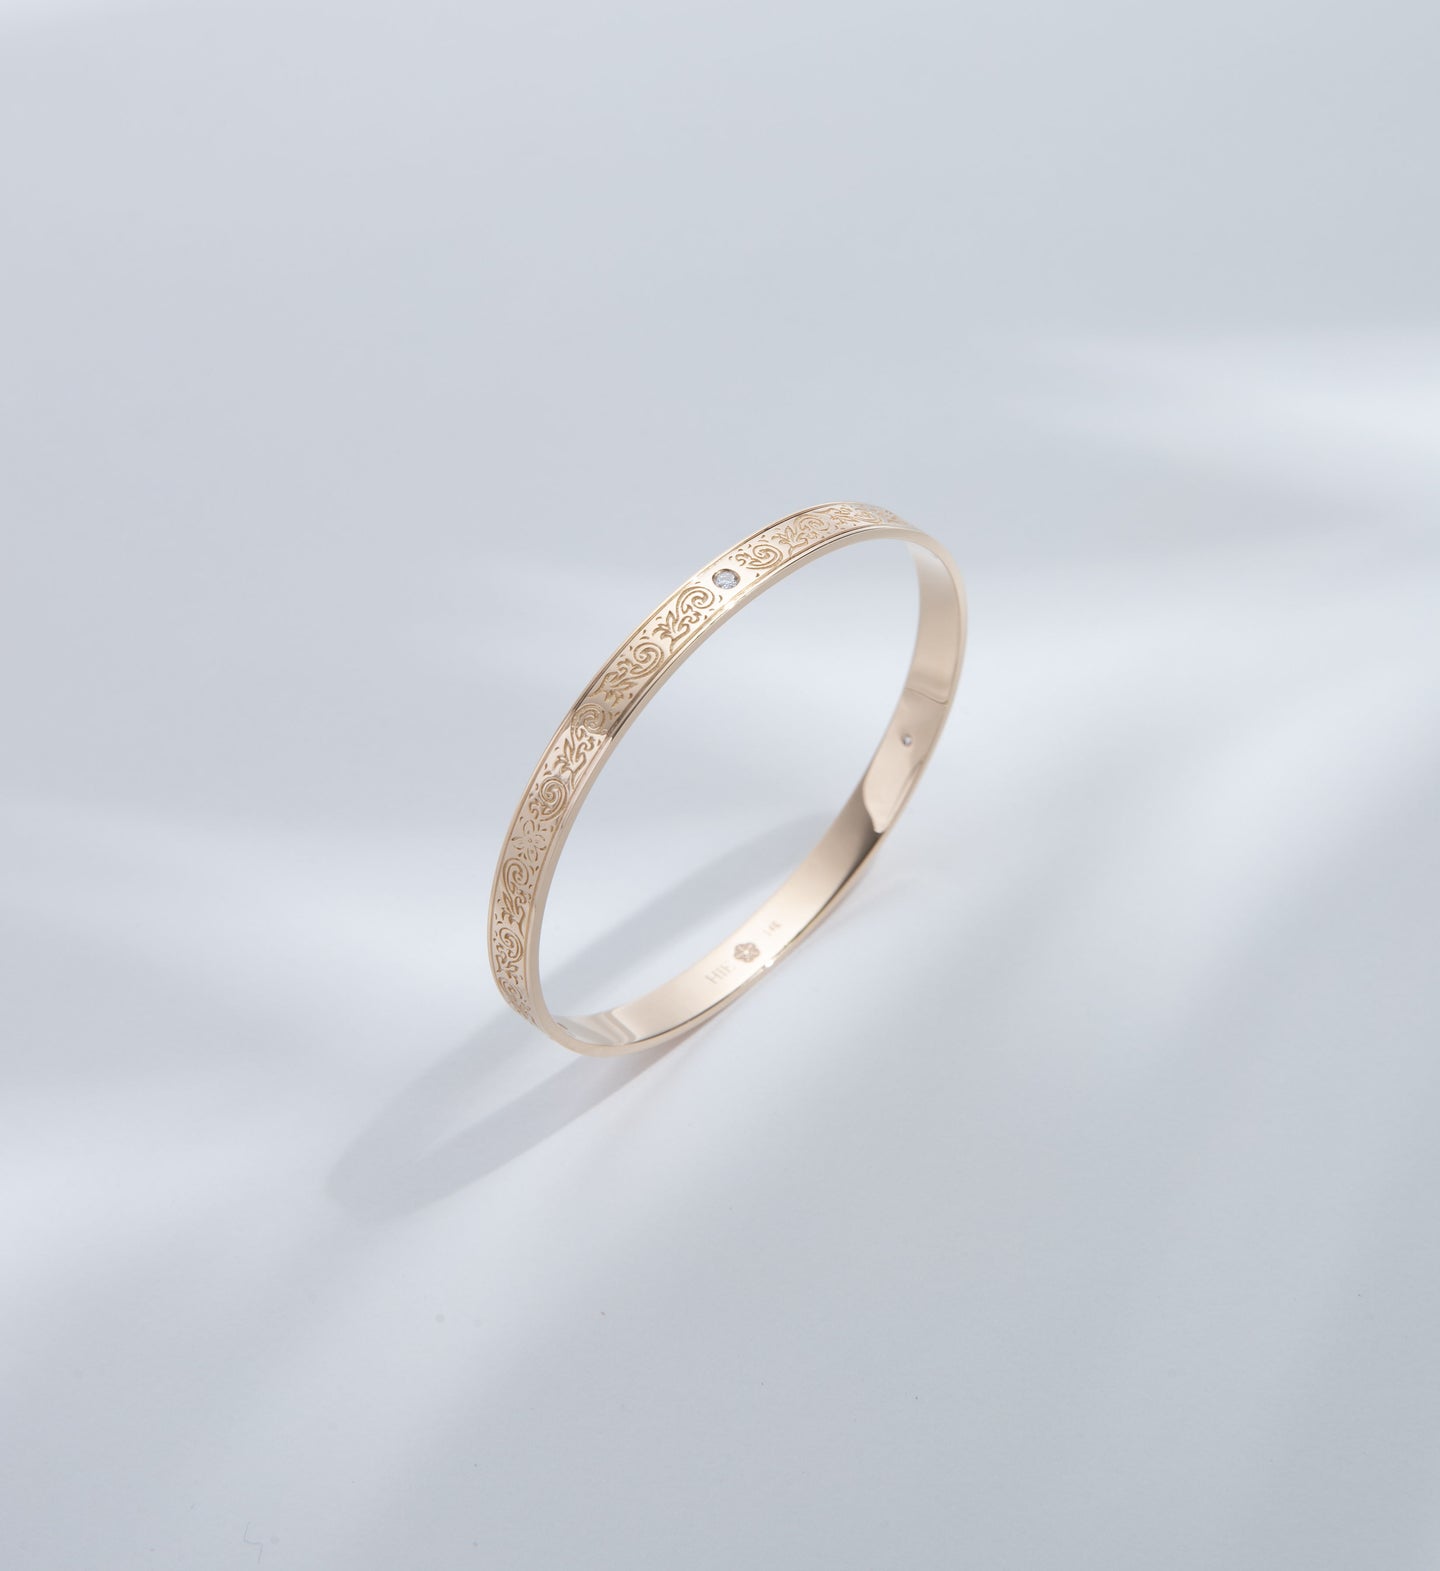 Hie Uluhe gold bangle bracelet with detailed engraving and diamonds, standing upright